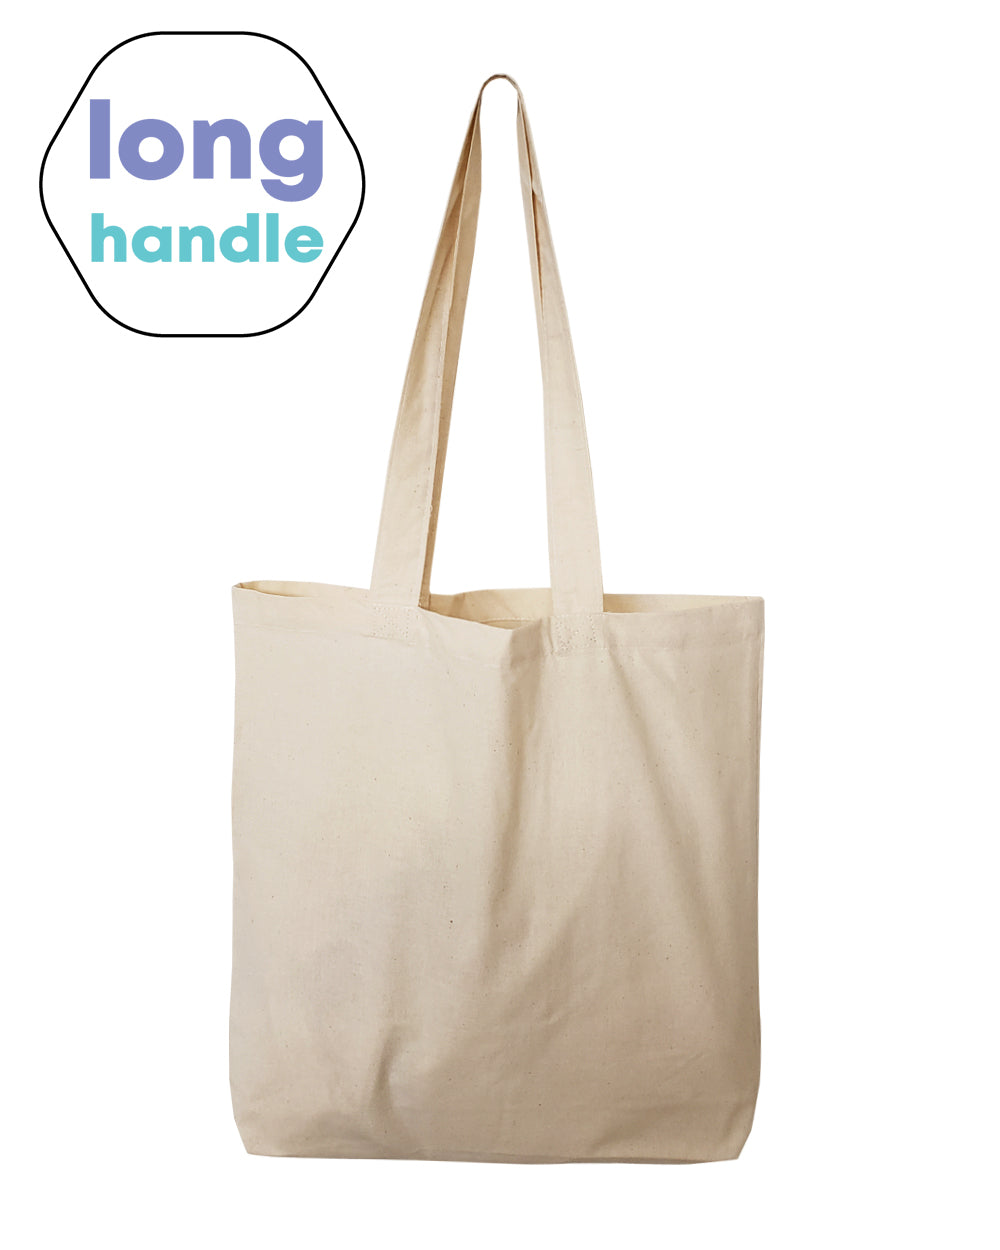 Over the Shoulder Long Handle Cotton Tote Bags